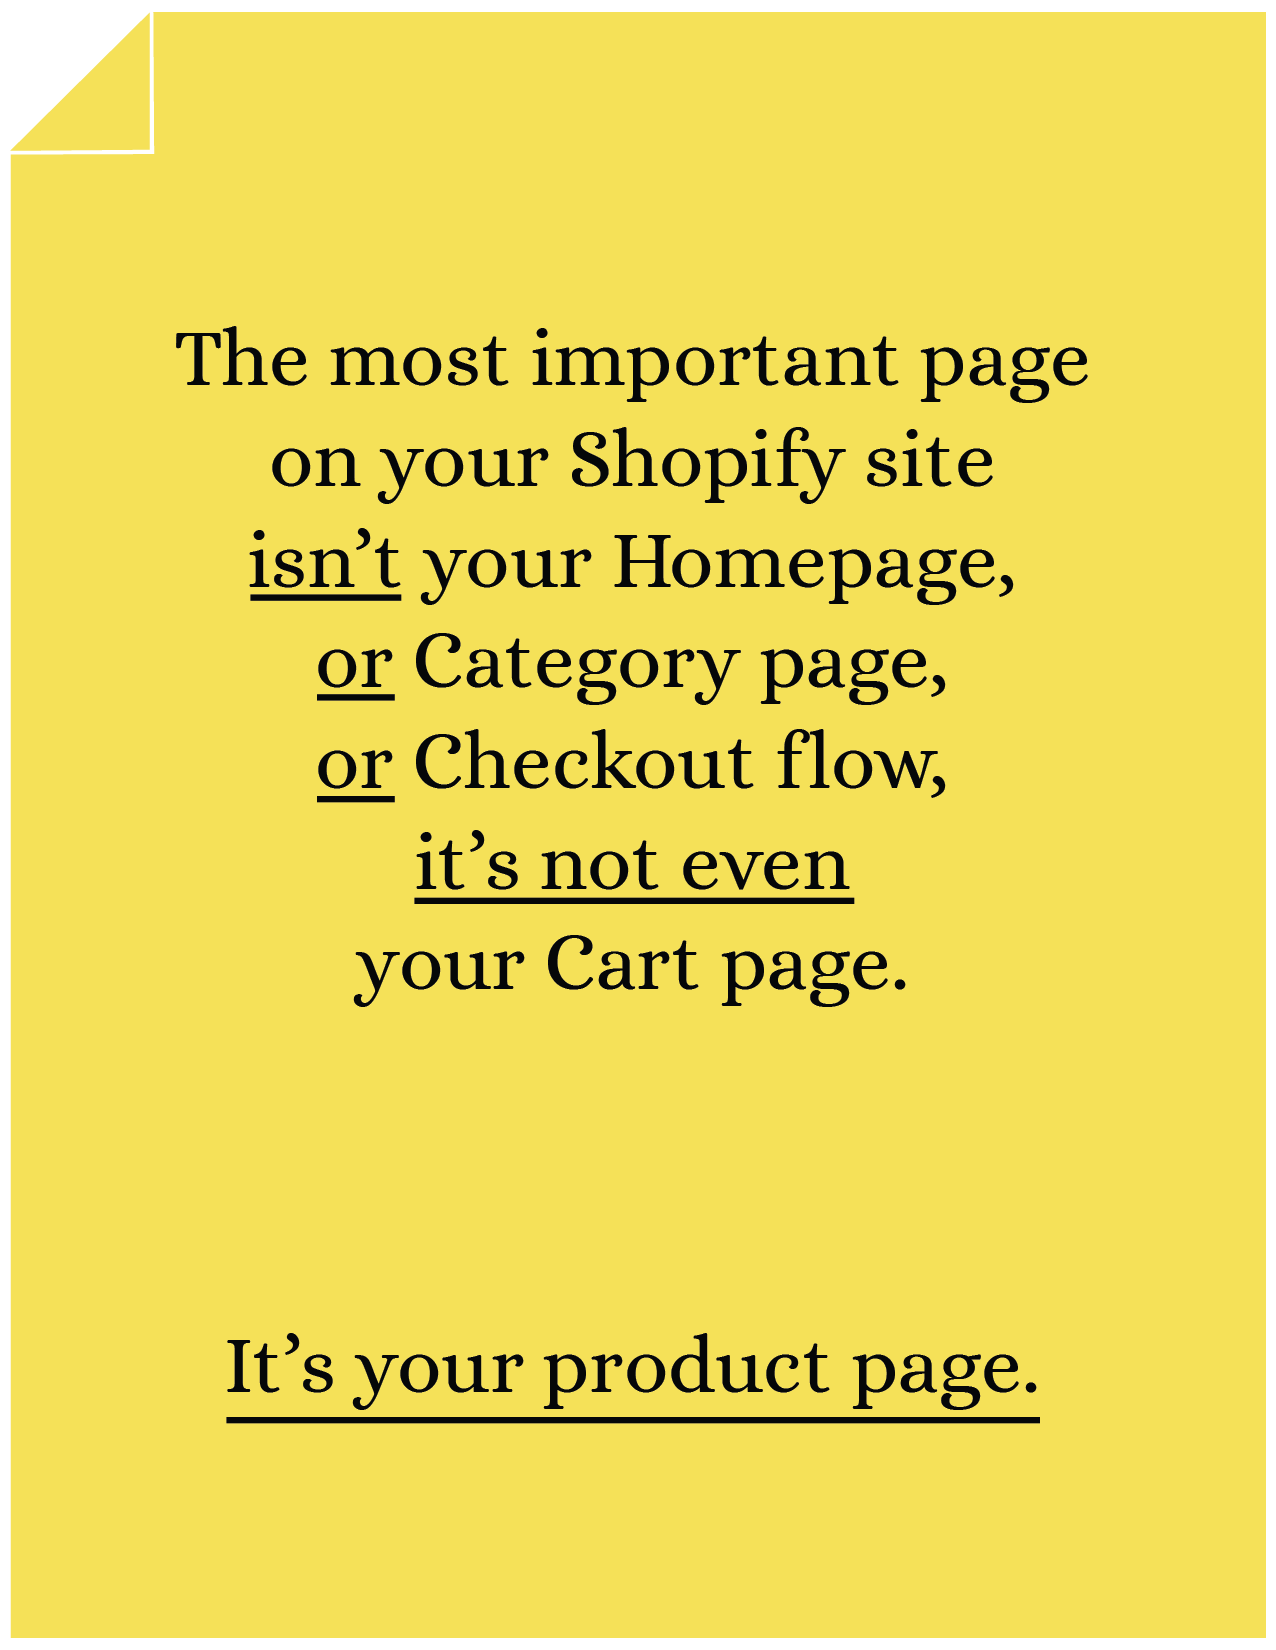 Single Most Important Page on an Ecommerce Site